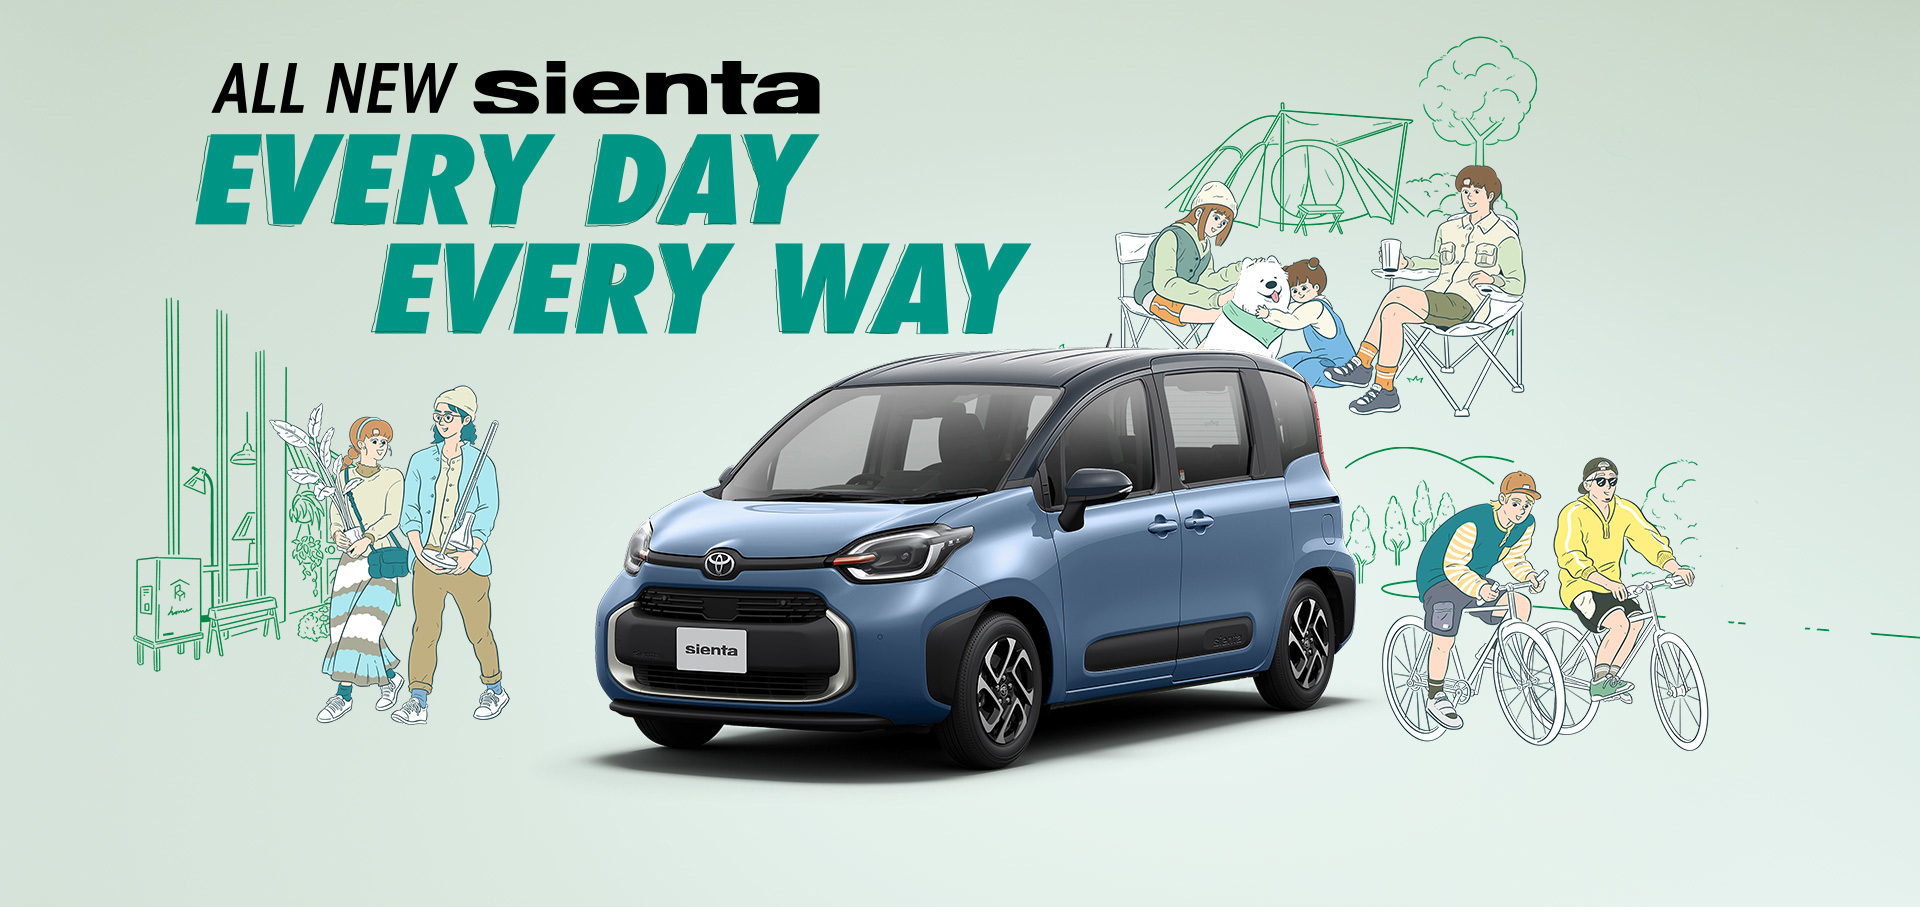 All-New Sienta | Every Day Every Way